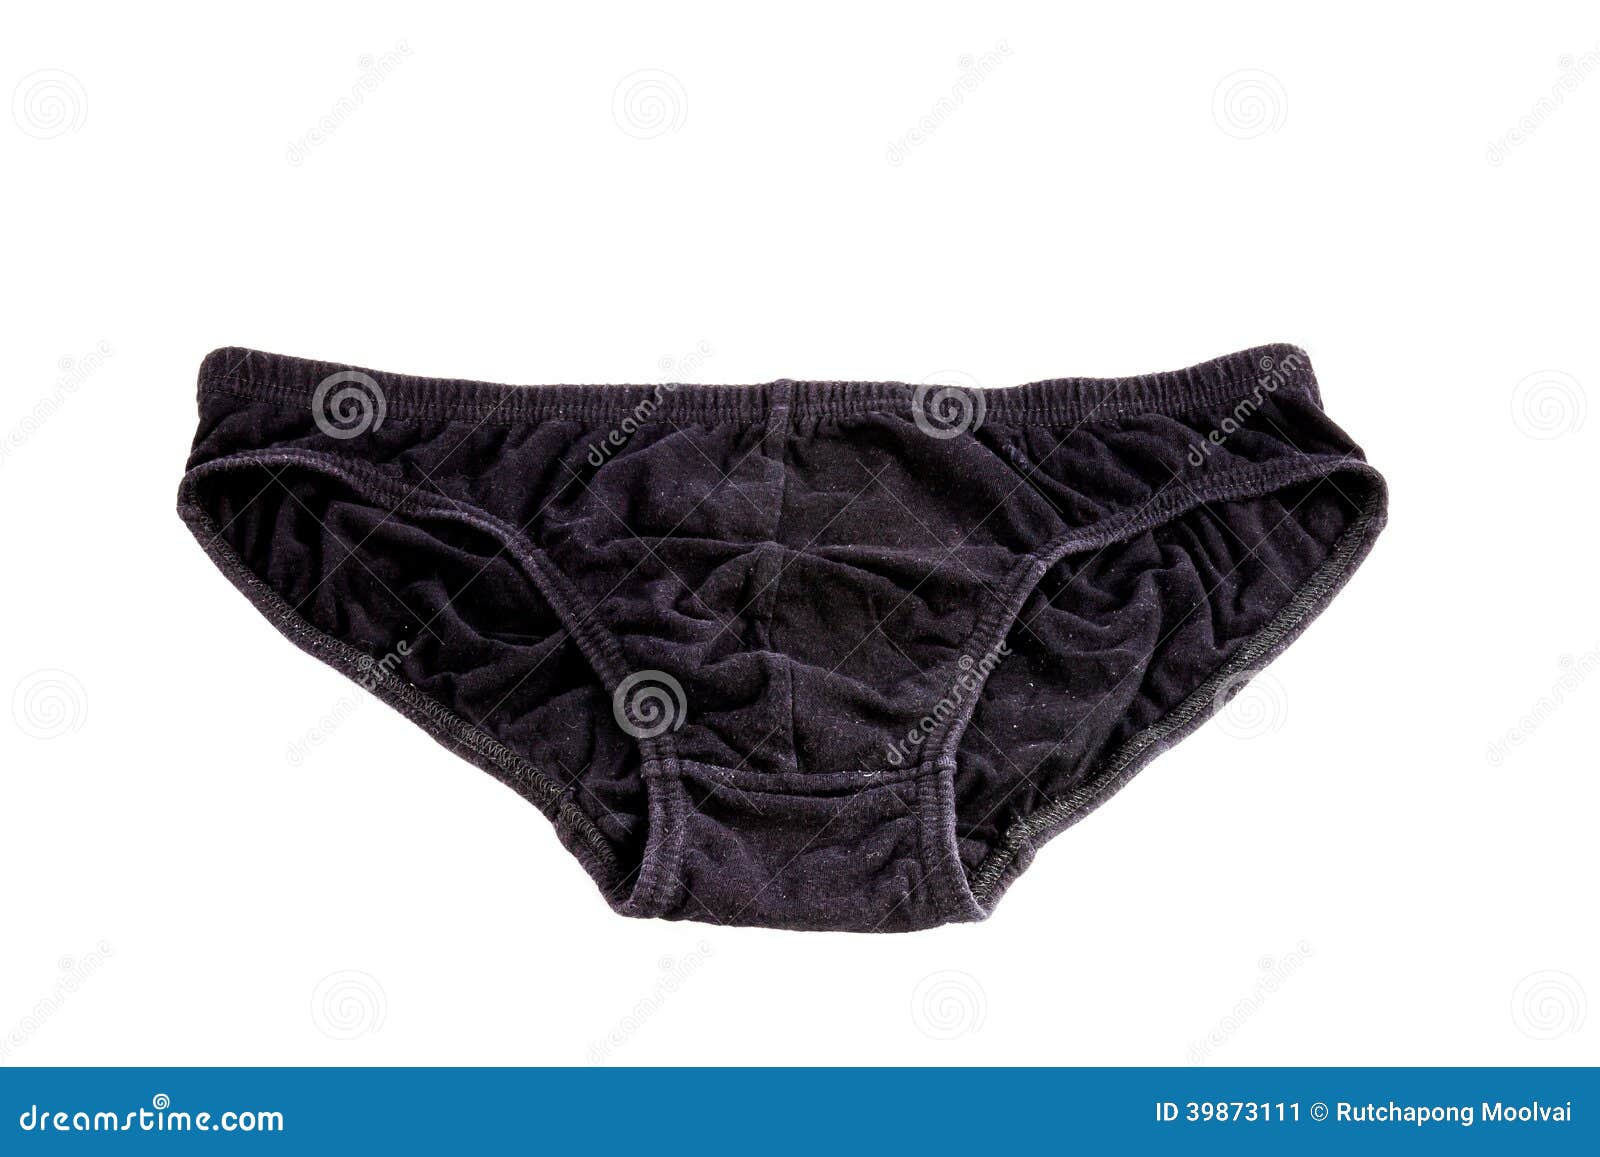 Men S Briefs Isolated on a White Background Stock Image - Image of ...